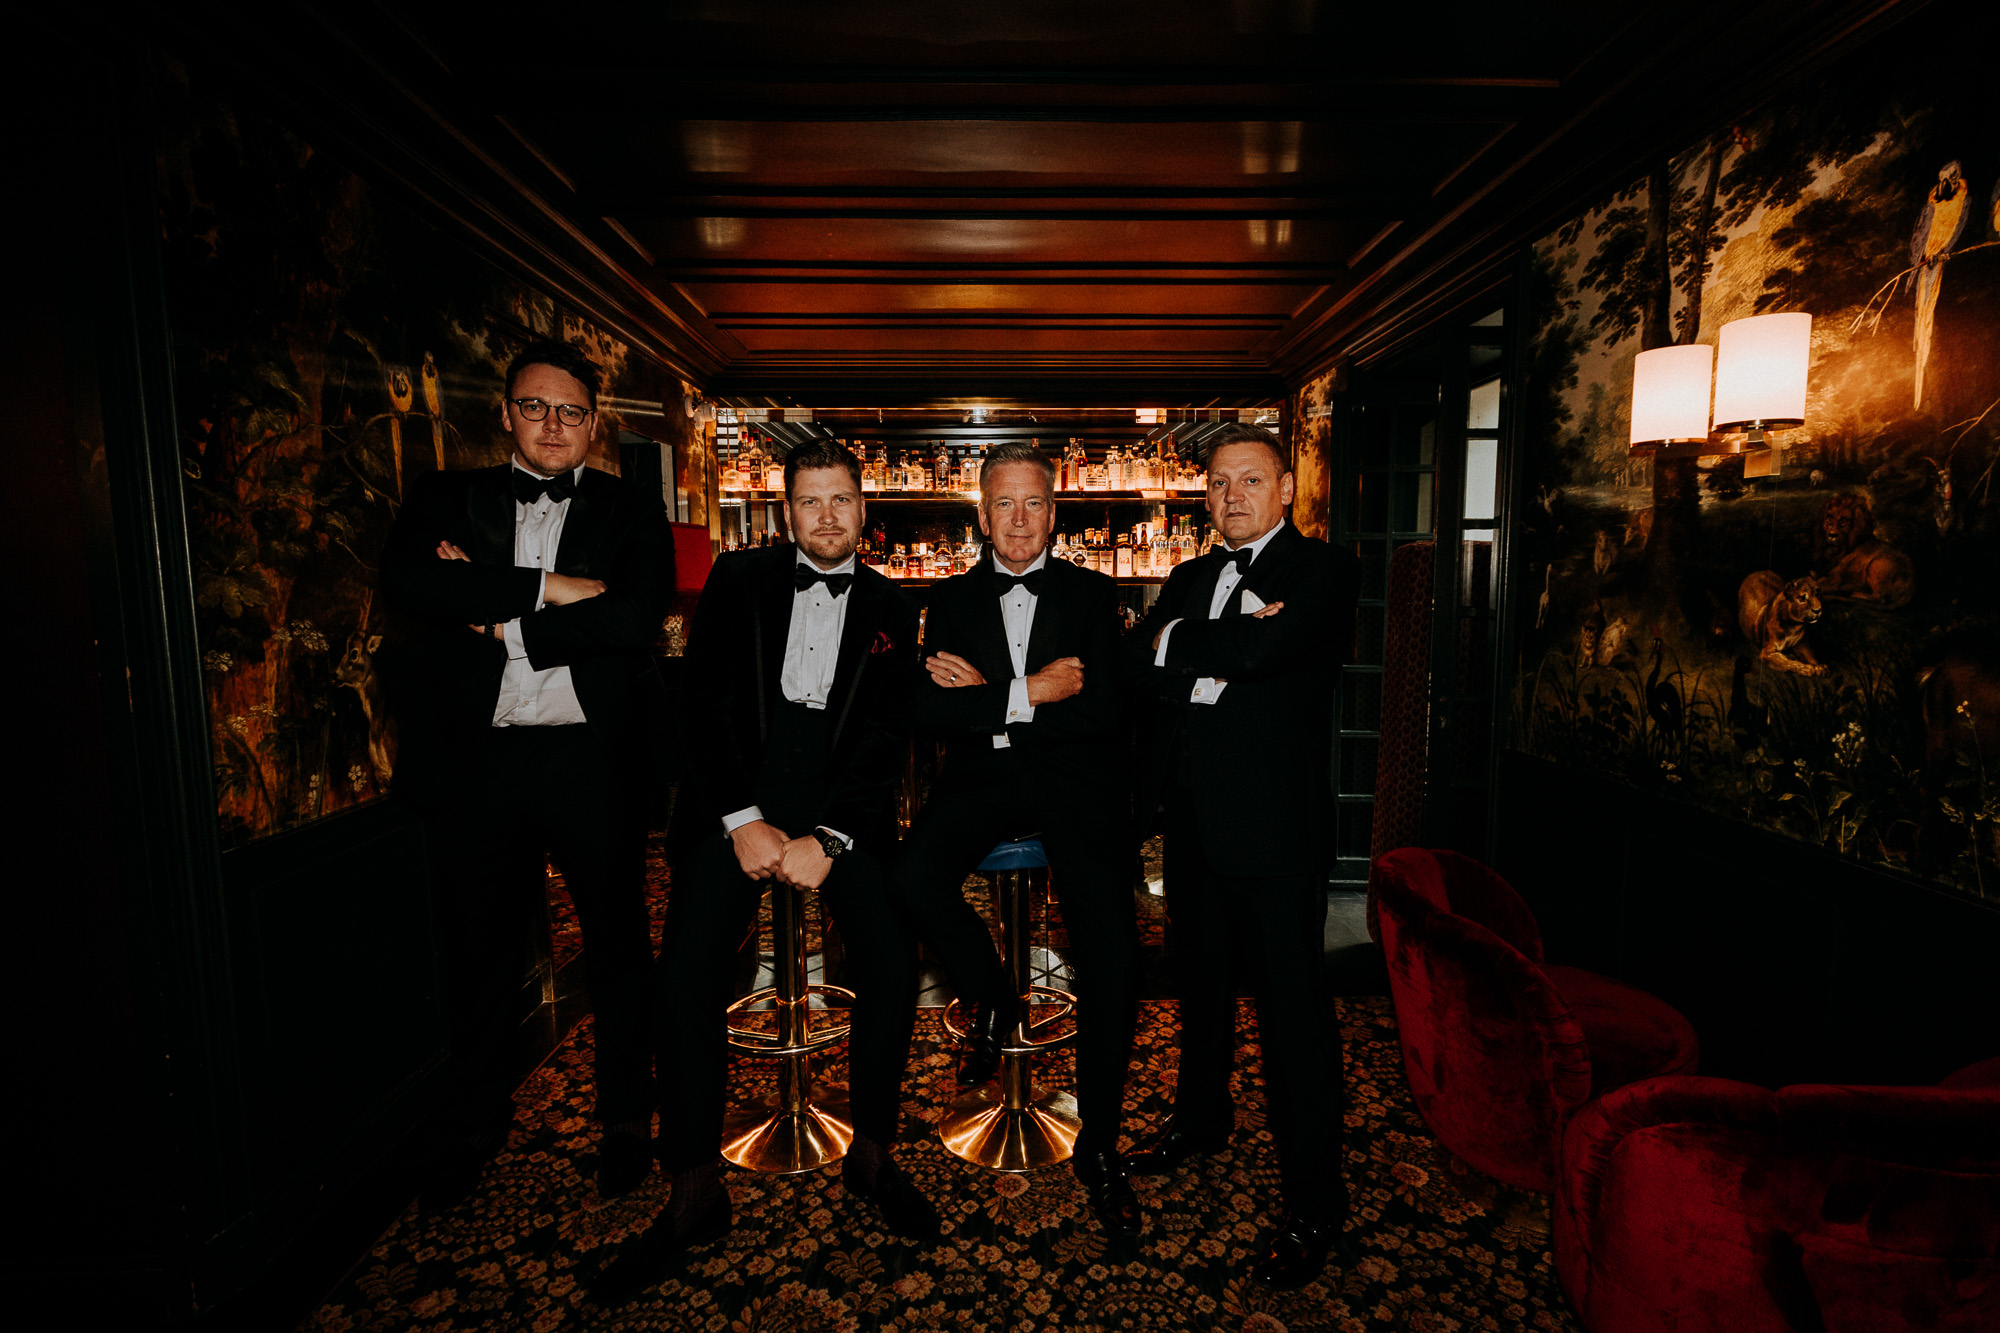 Paris wedding photographer: the two dads, the groom and his best man are posing in front of the Très Particulier bar in Montmartre before the ceremony